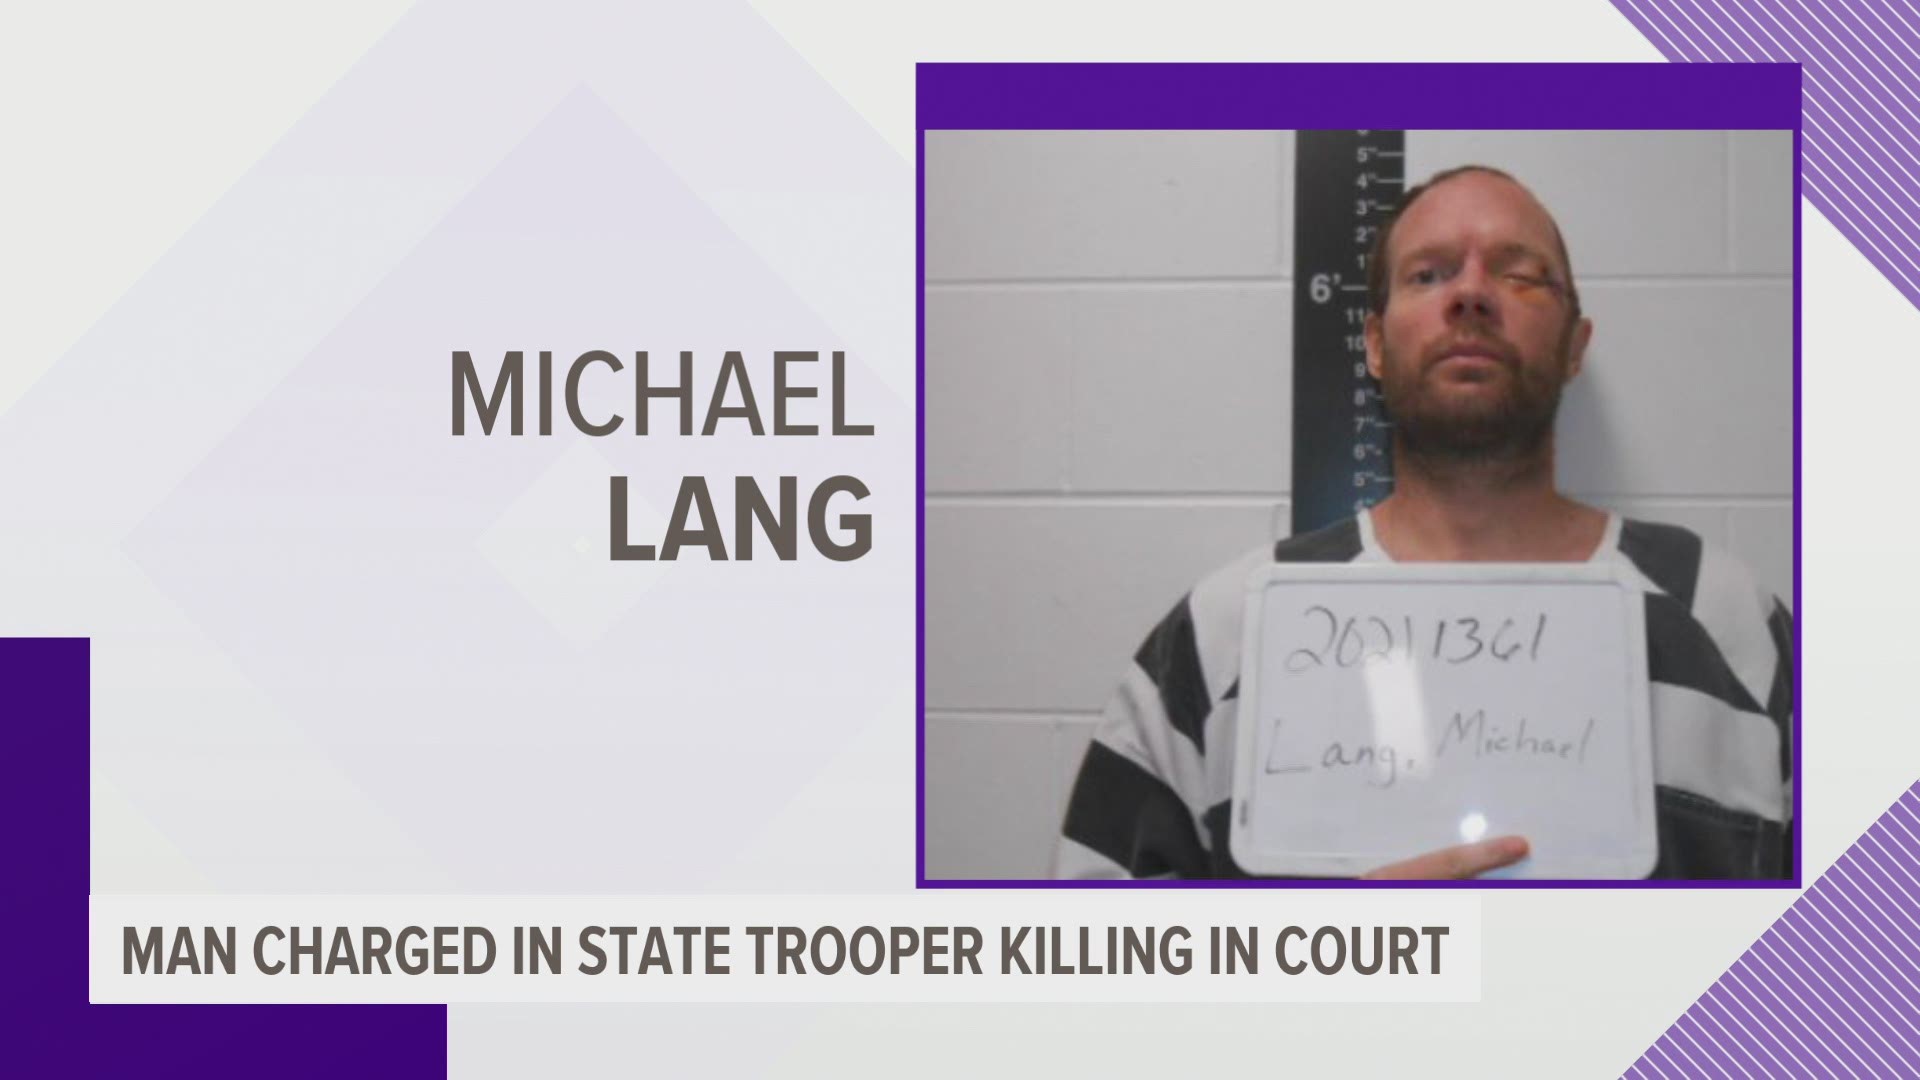 Michael Lang, 41, is charged with first-degree murder, assault on a police officer and attempted murder for the April 9 killing of Sgt. Jim Smith.